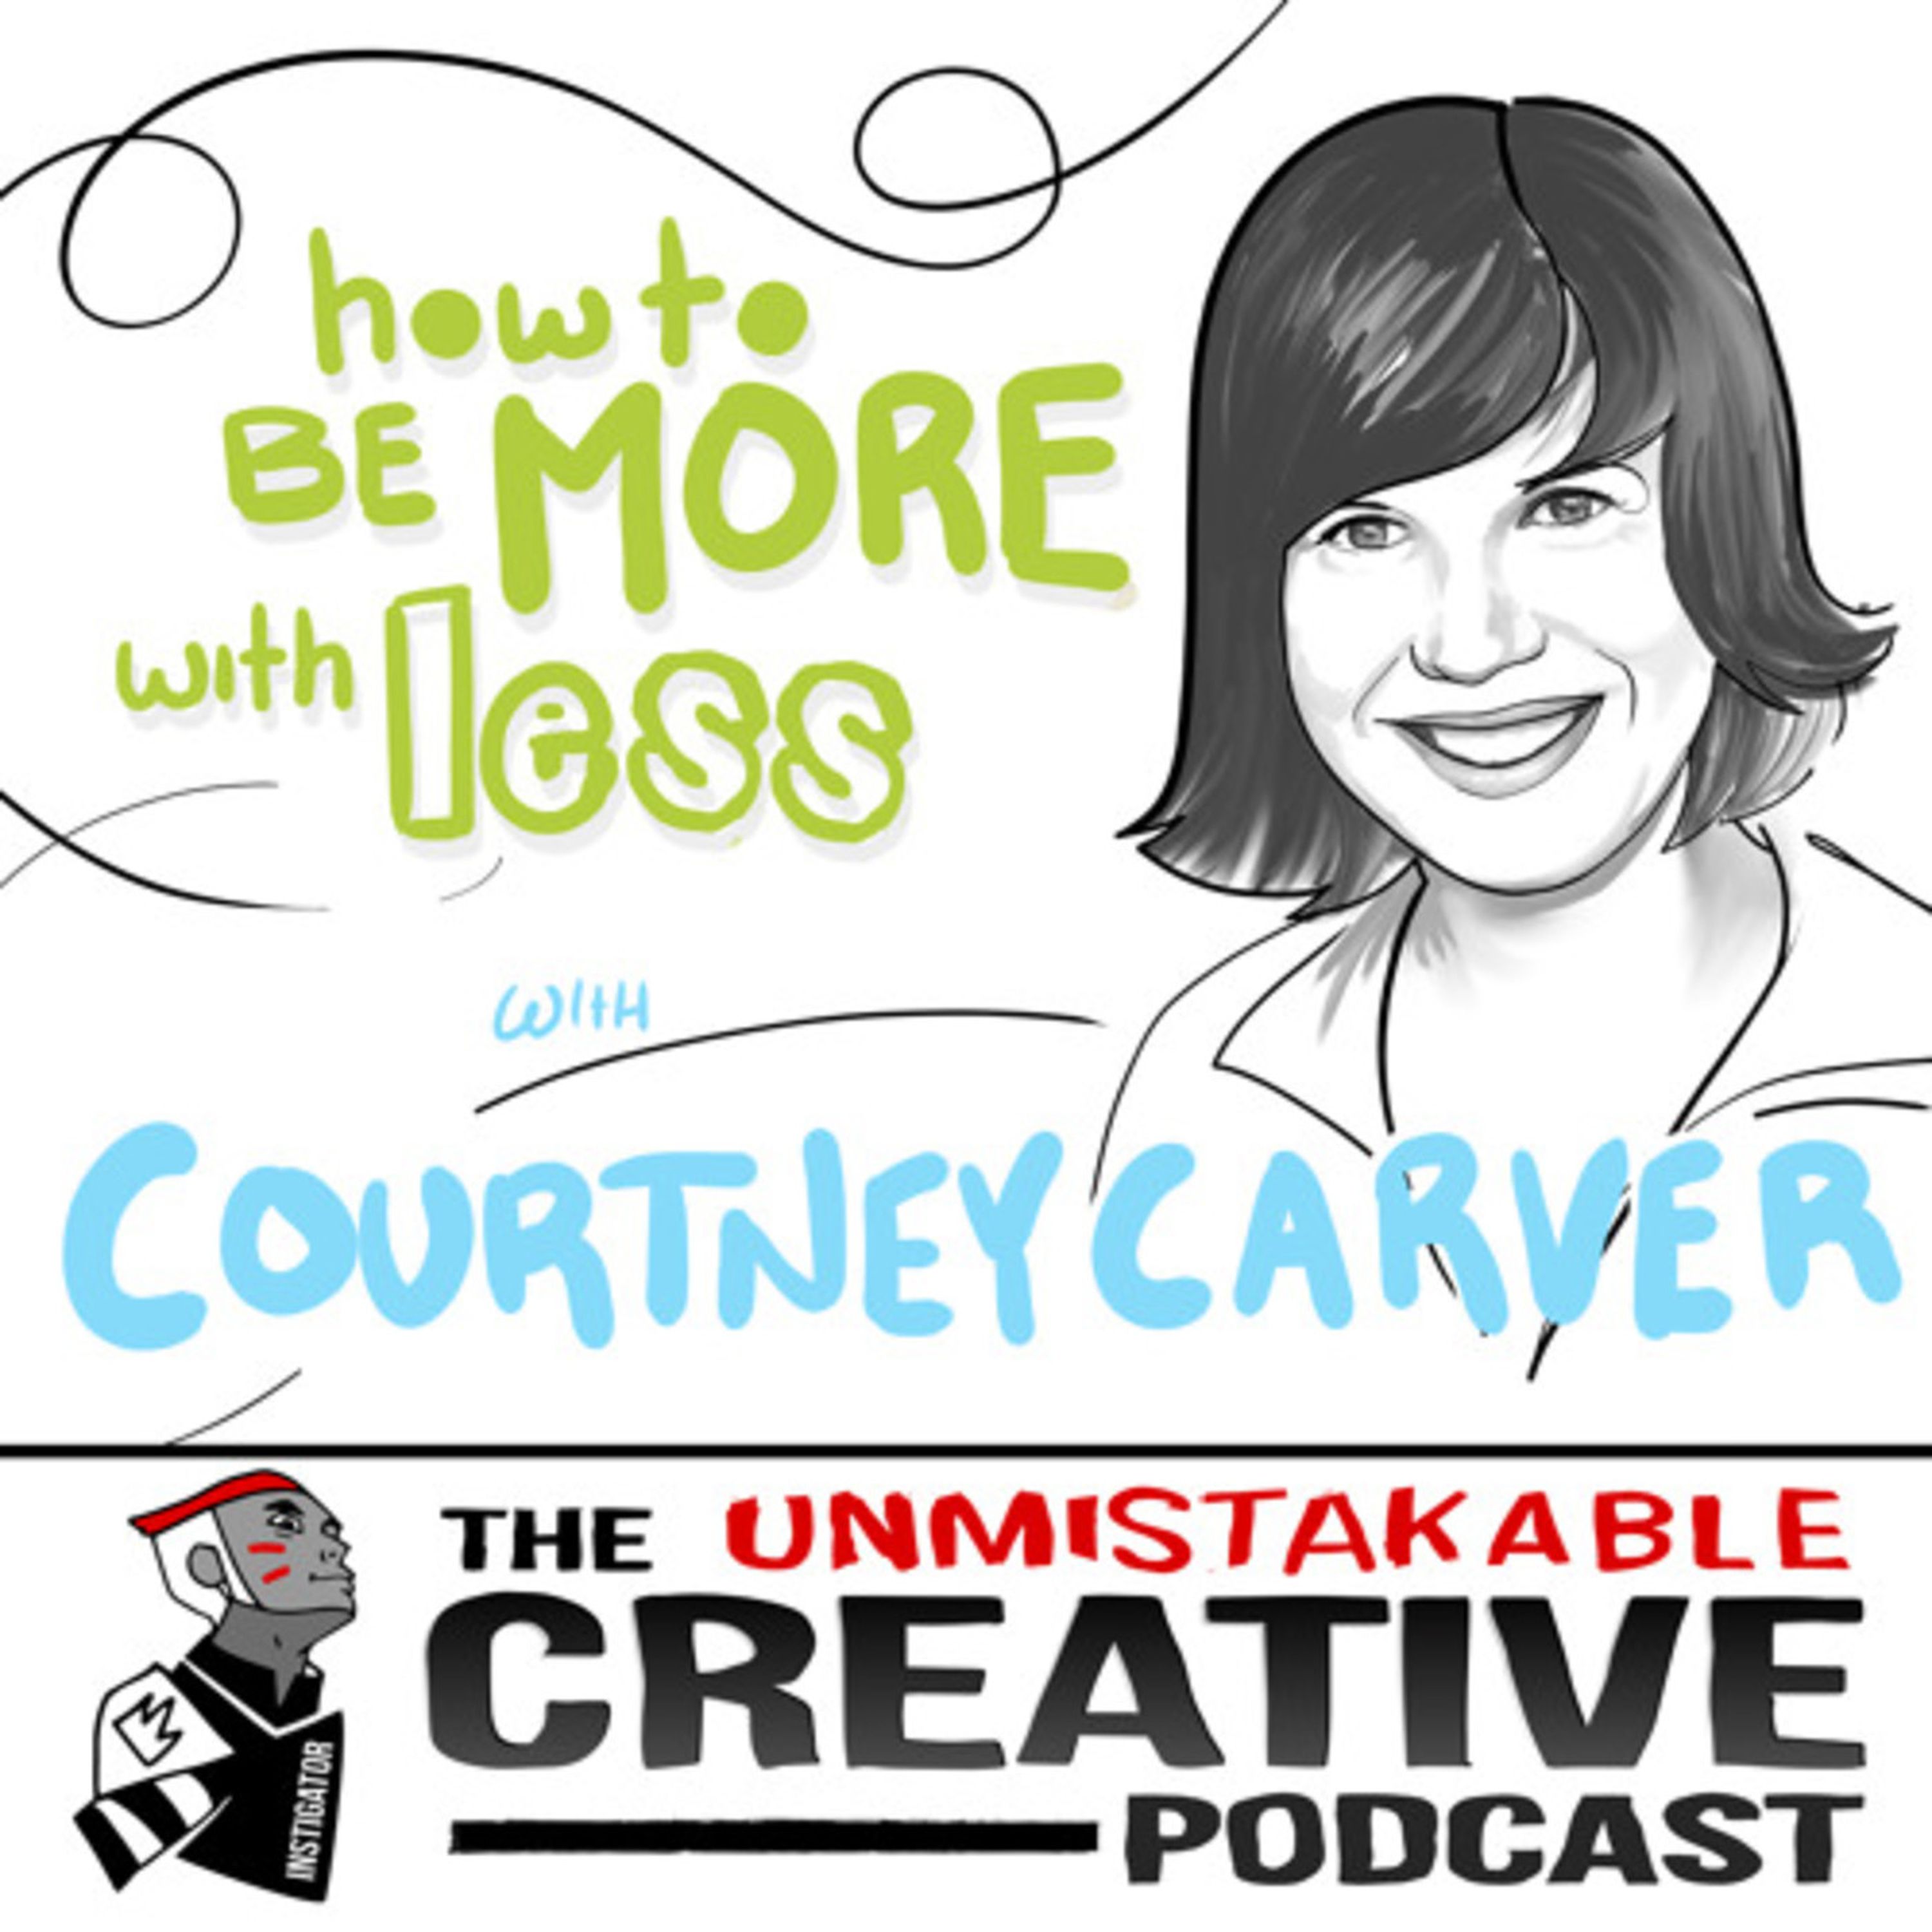 Courtney Carver: How to be More with Less